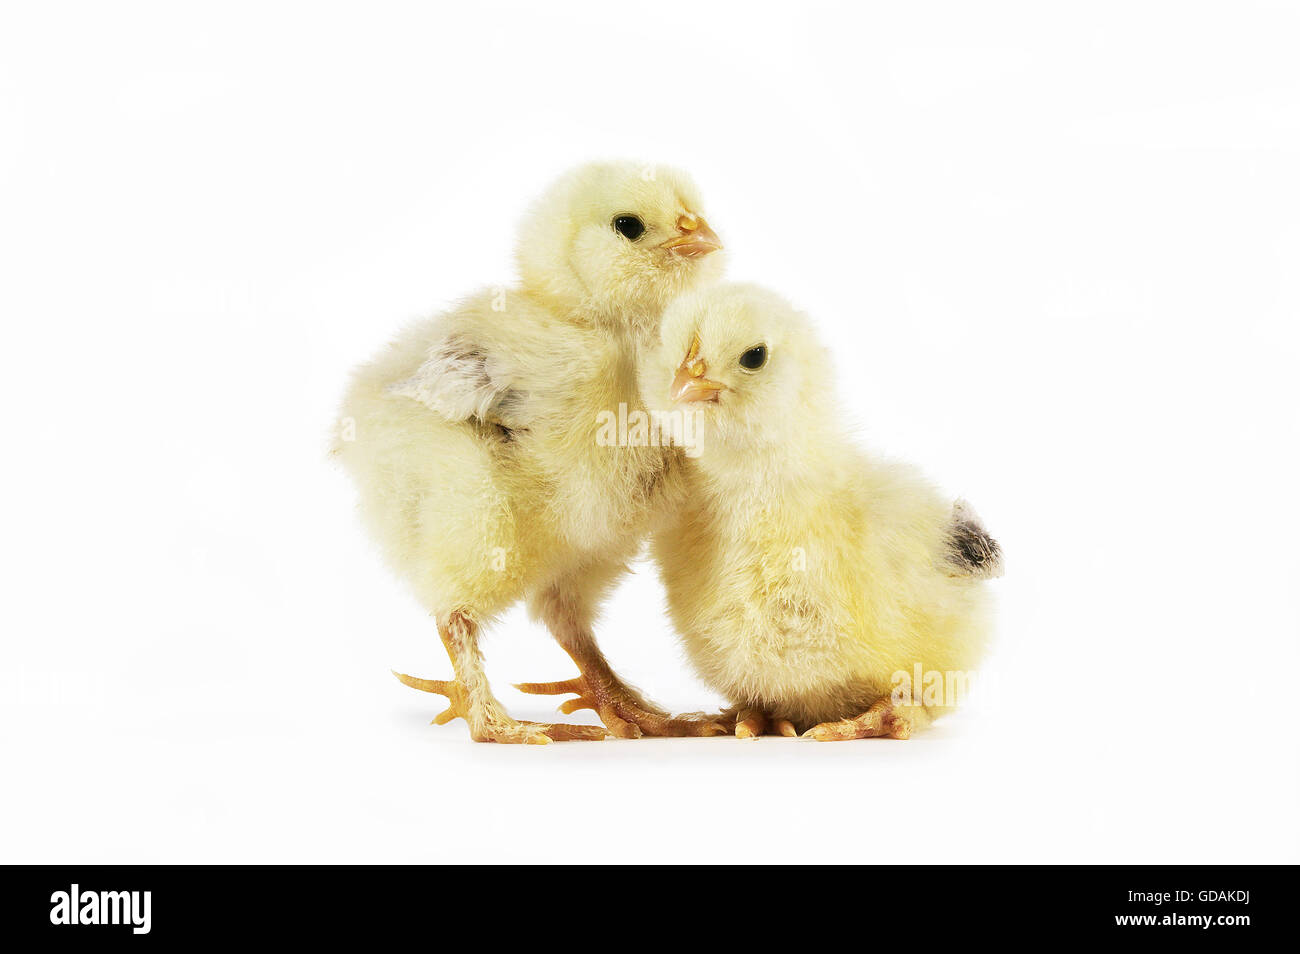 Domestic Chicken, Chicks against White Background Stock Photo